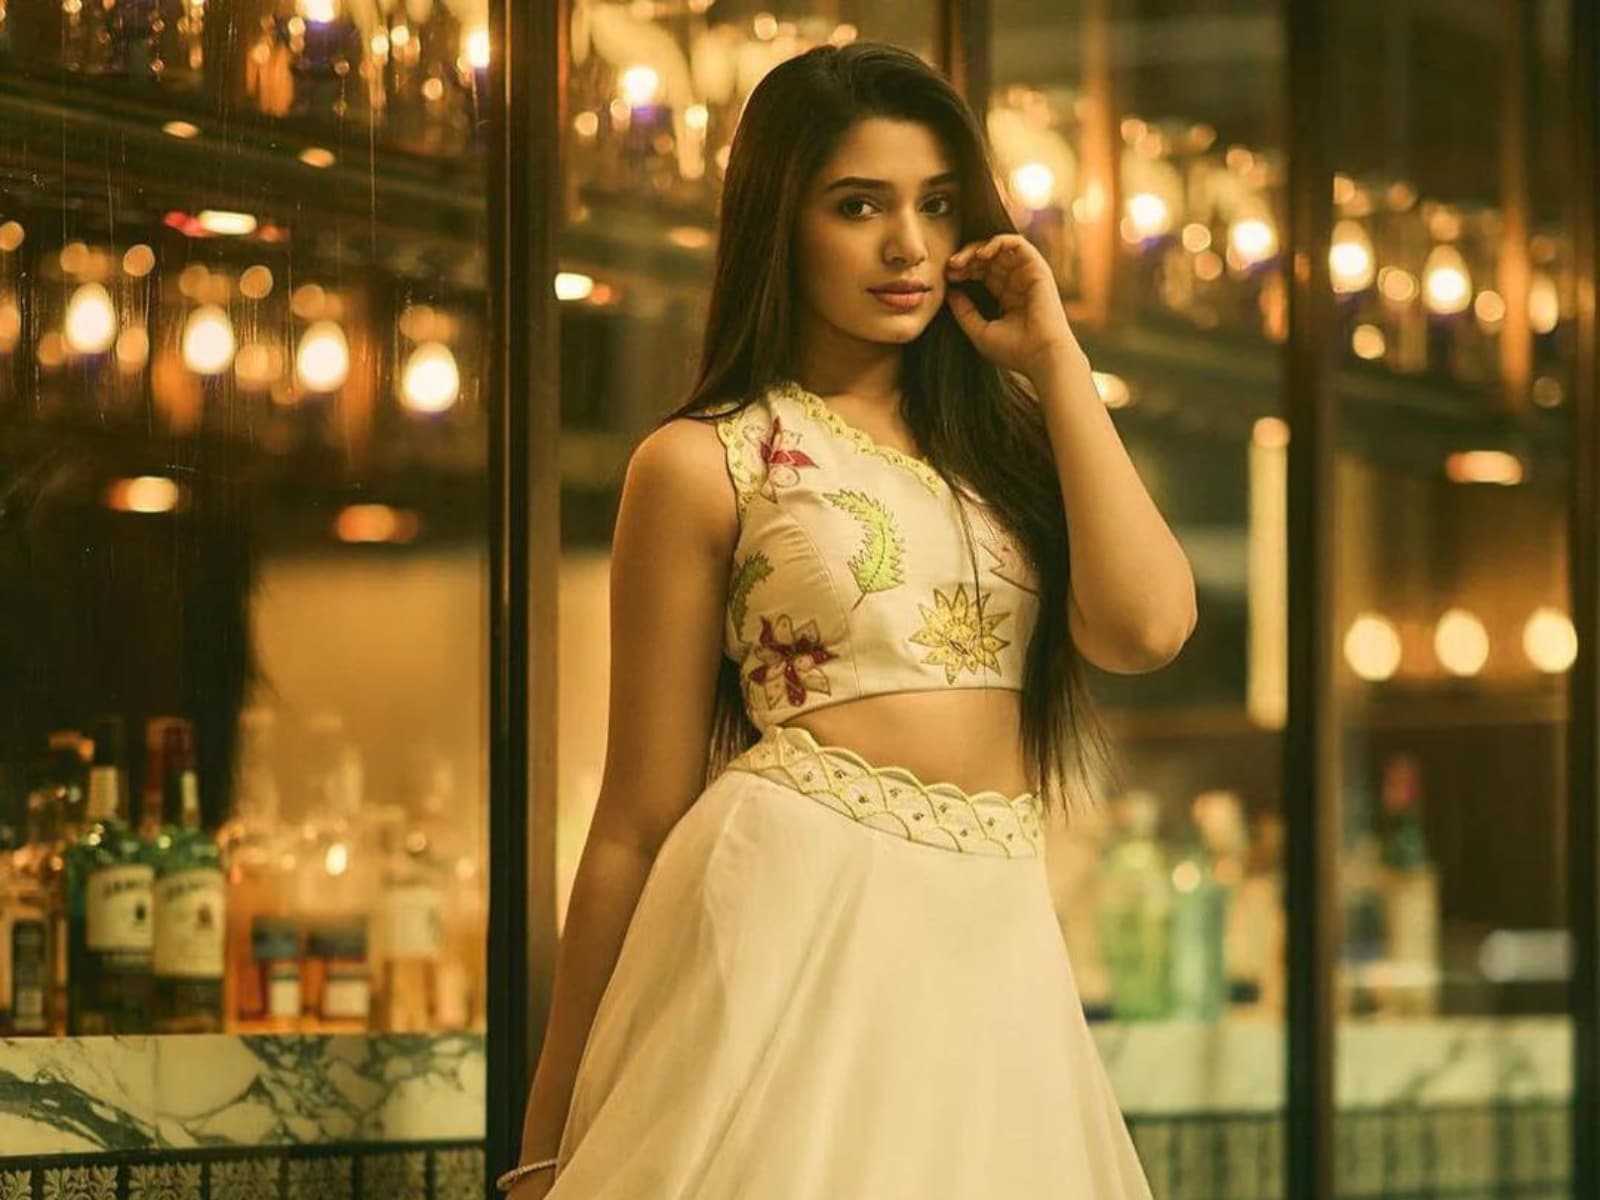 Krithi Shetty Looks Beautiful In A Beige Saree, See Pics - News18